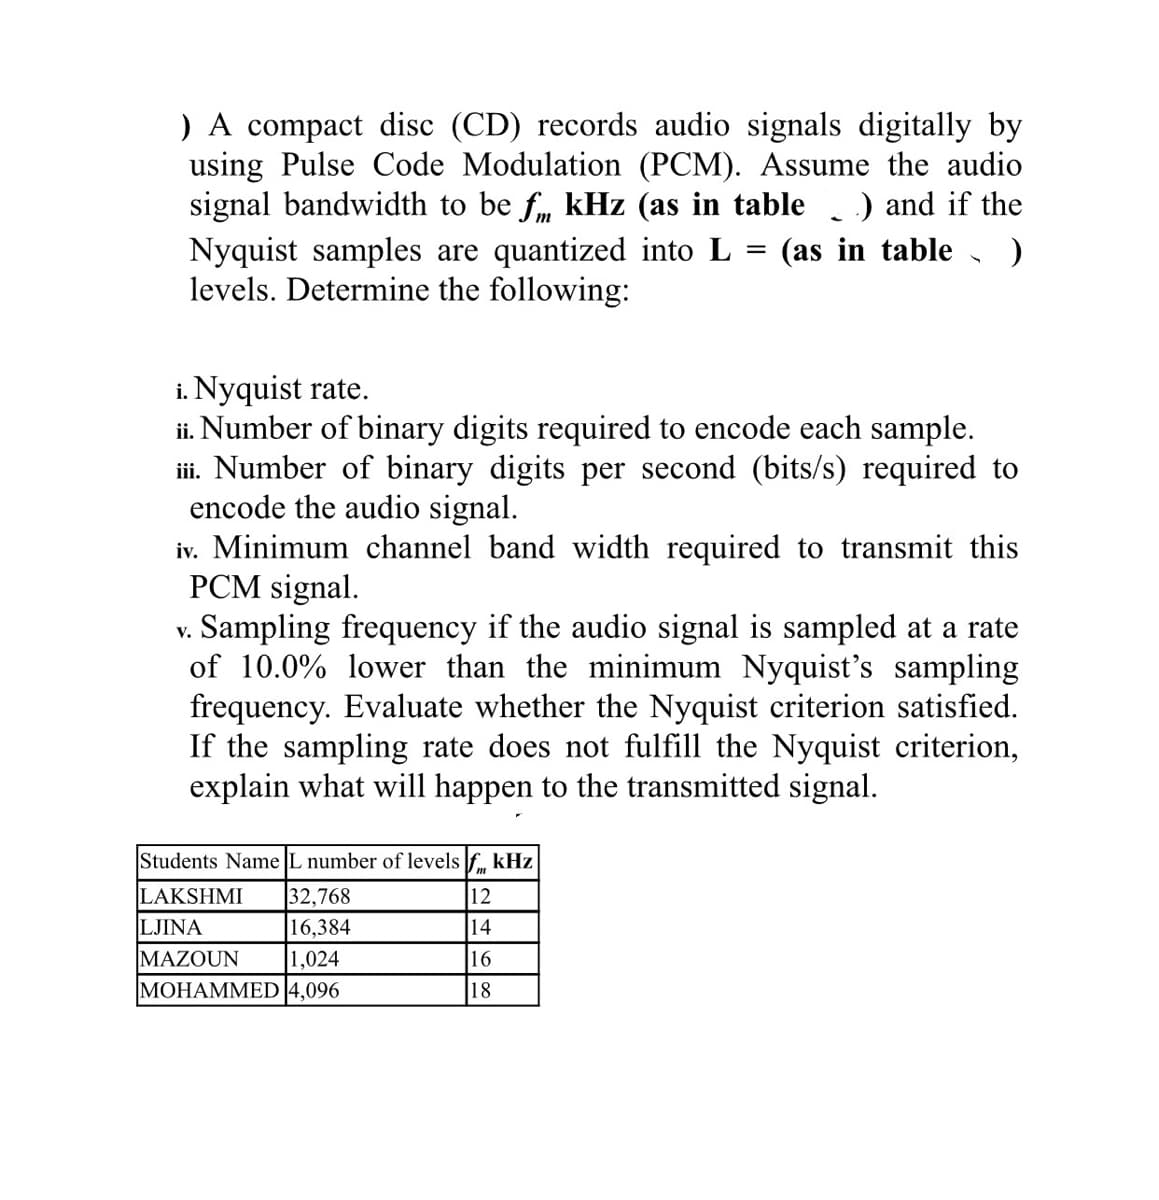 ) A compact disc (CD) records audio signals digitally by
using Pulse Code Modulation (PCM). Assume the audio
signal bandwidth to be f, kHz (as in table ) and if the
Nyquist samples are quantized into L = (as in table , )
levels. Determine the following:
i. Nyquist rate.
ii. Number of binary digits required to encode each sample.
iii. Number of binary digits per second (bits/s) required to
encode the audio signal.
iv. Minimum channel band width required to transmit this
PCM signal.
Sampling frequency if the audio signal is sampled at a rate
of 10.0% lower than the minimum Nyquist's sampling
frequency. Evaluate whether the Nyquist criterion satisfied.
If the sampling rate does not fulfill the Nyquist criterion,
explain what will happen to the transmitted signal.
V.
Students Name L number of levels f, kHz
LAKSHMI
32,768
16,384
12
LJINA
14
MAZOUN
1,024
16
|МОНАММED|4,096
18
